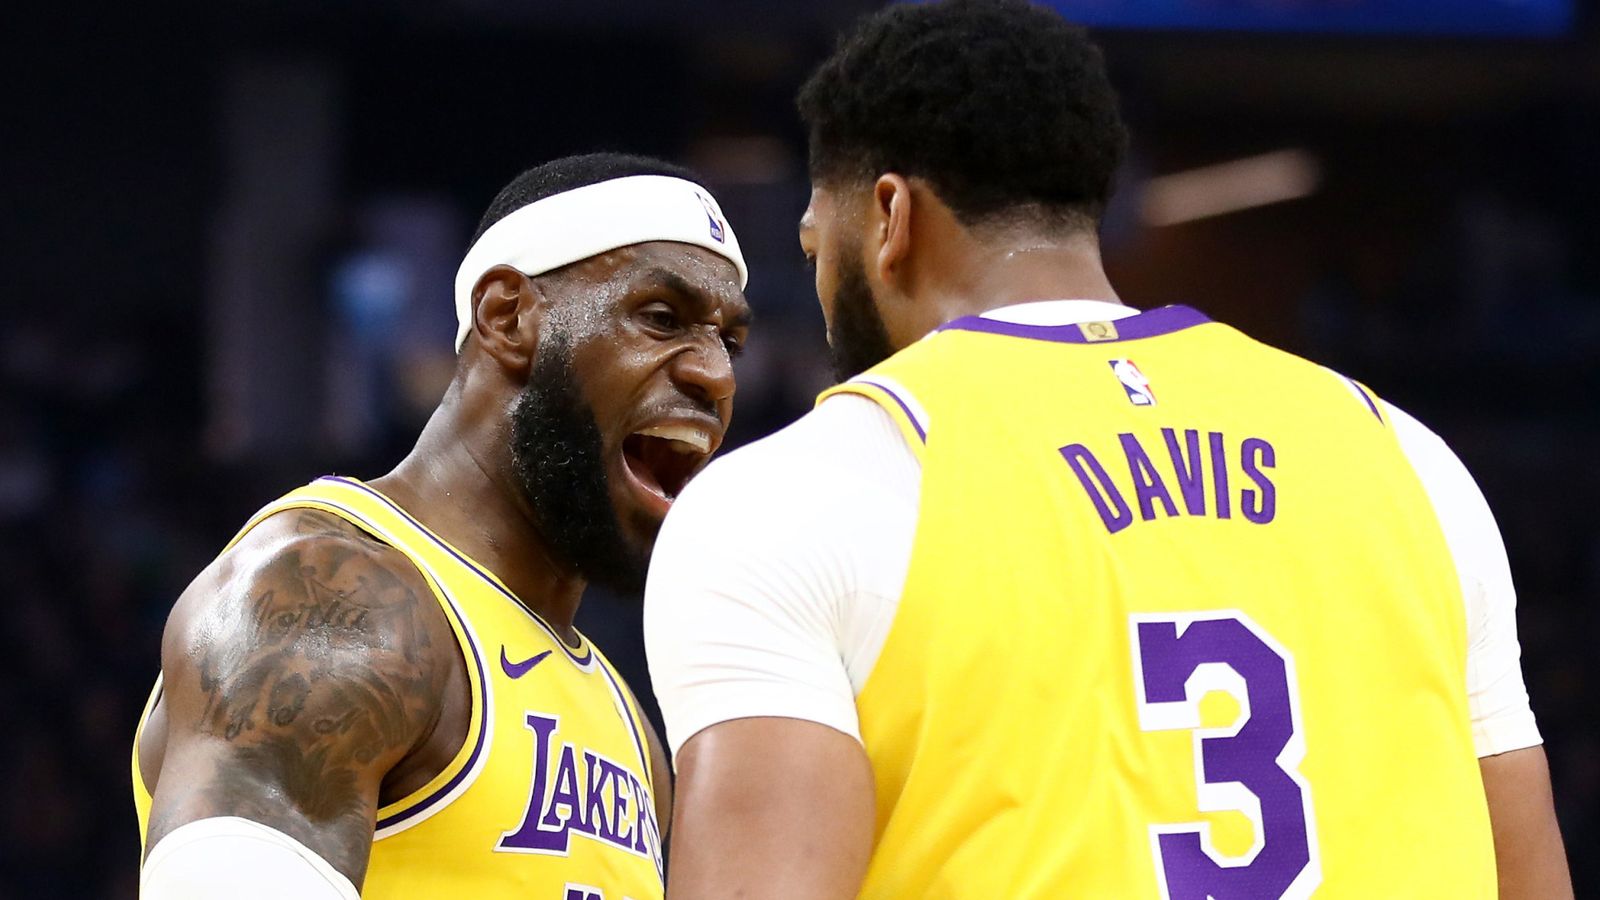 Lakers superstar LeBron James enters important partnership with